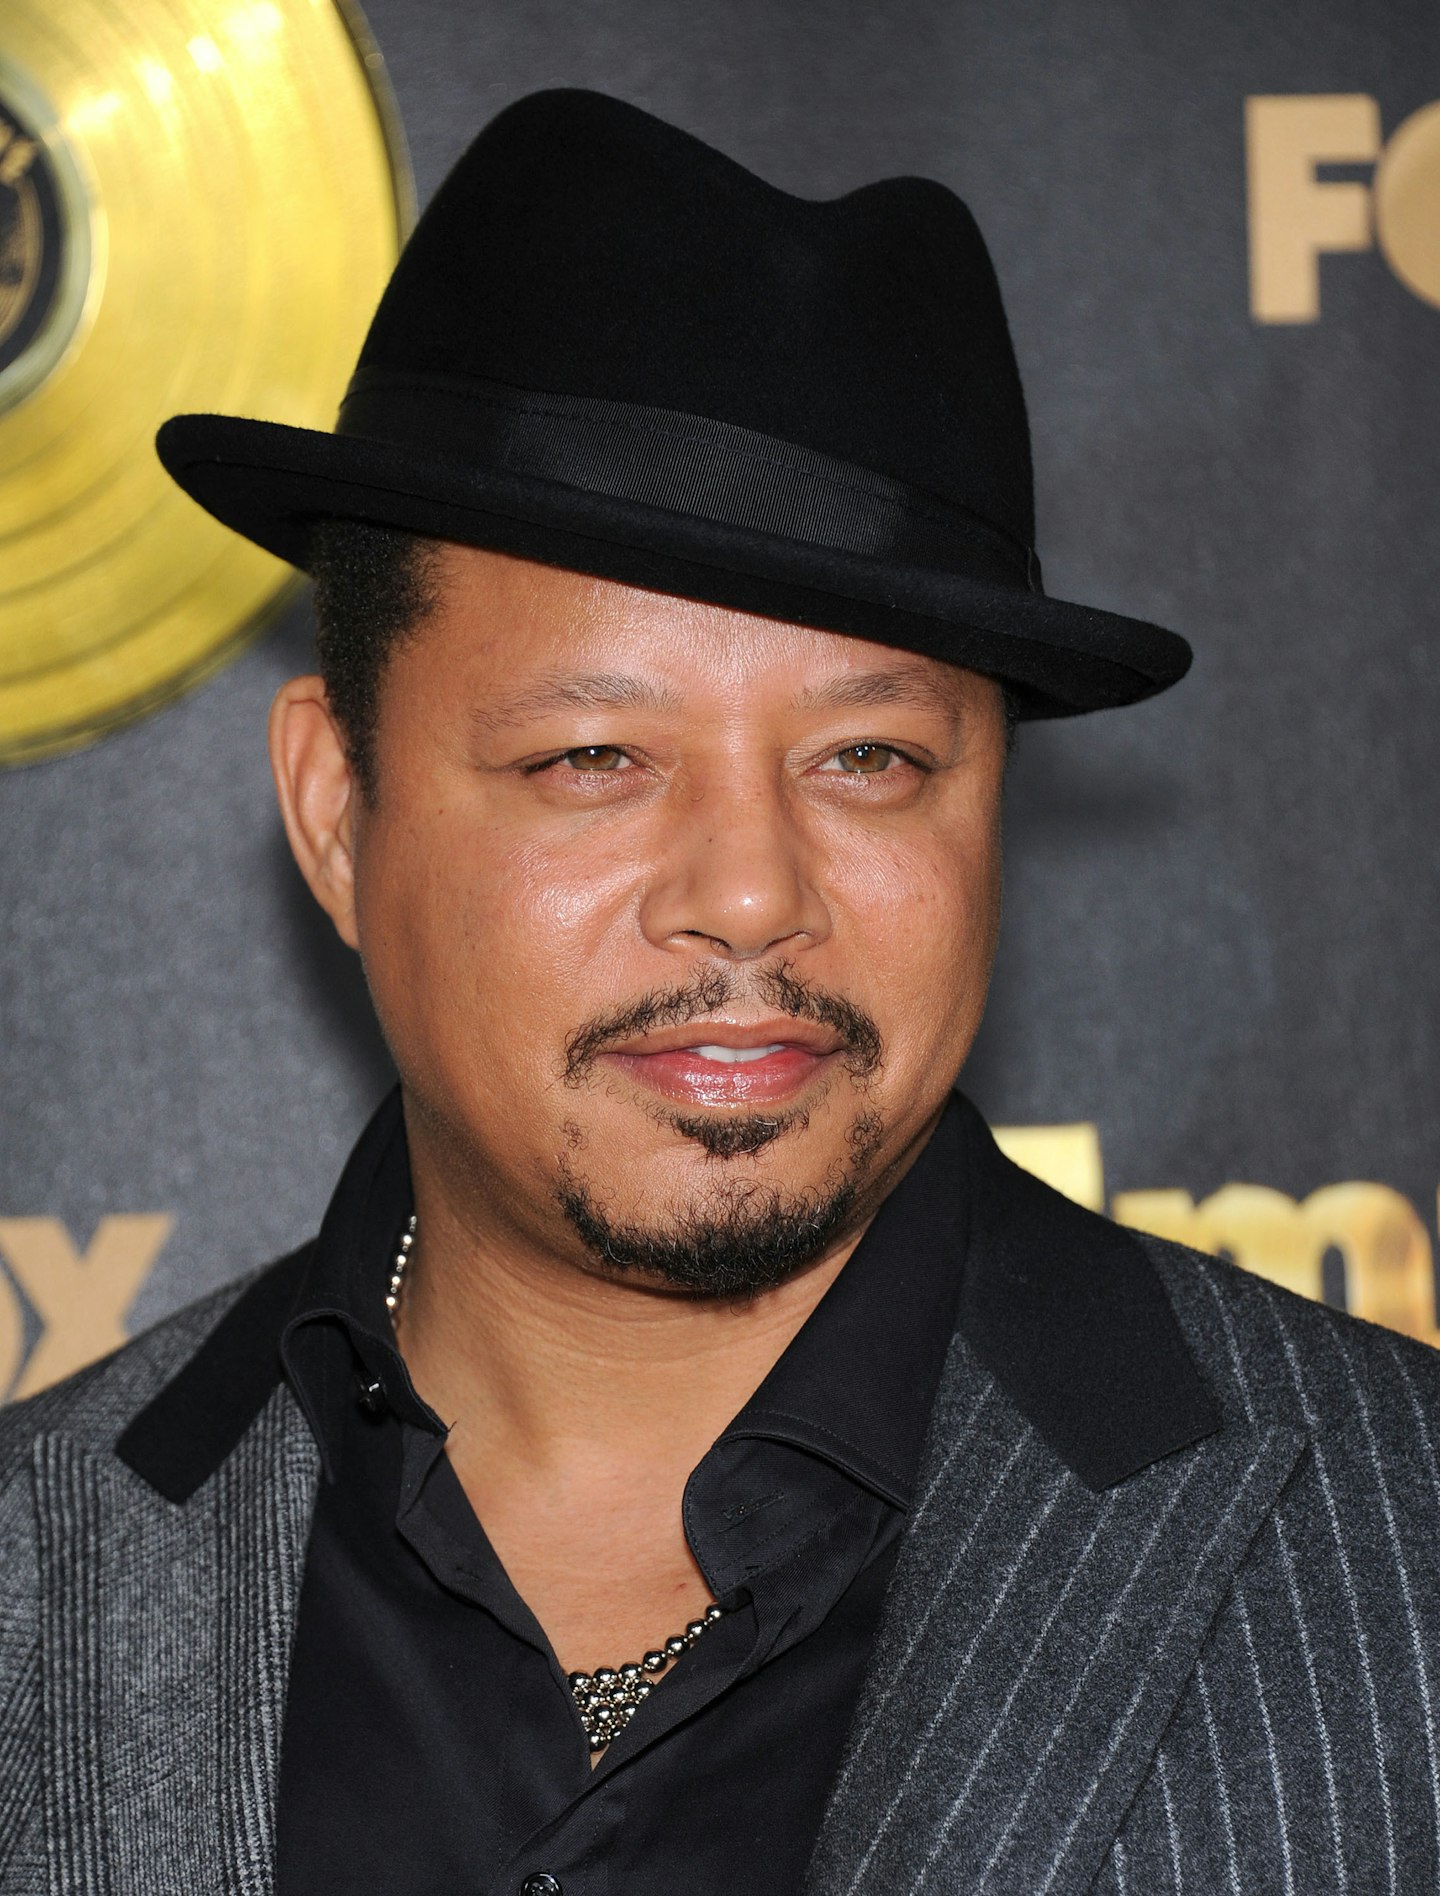 Terrence Howard, who plays Lucious Lyon